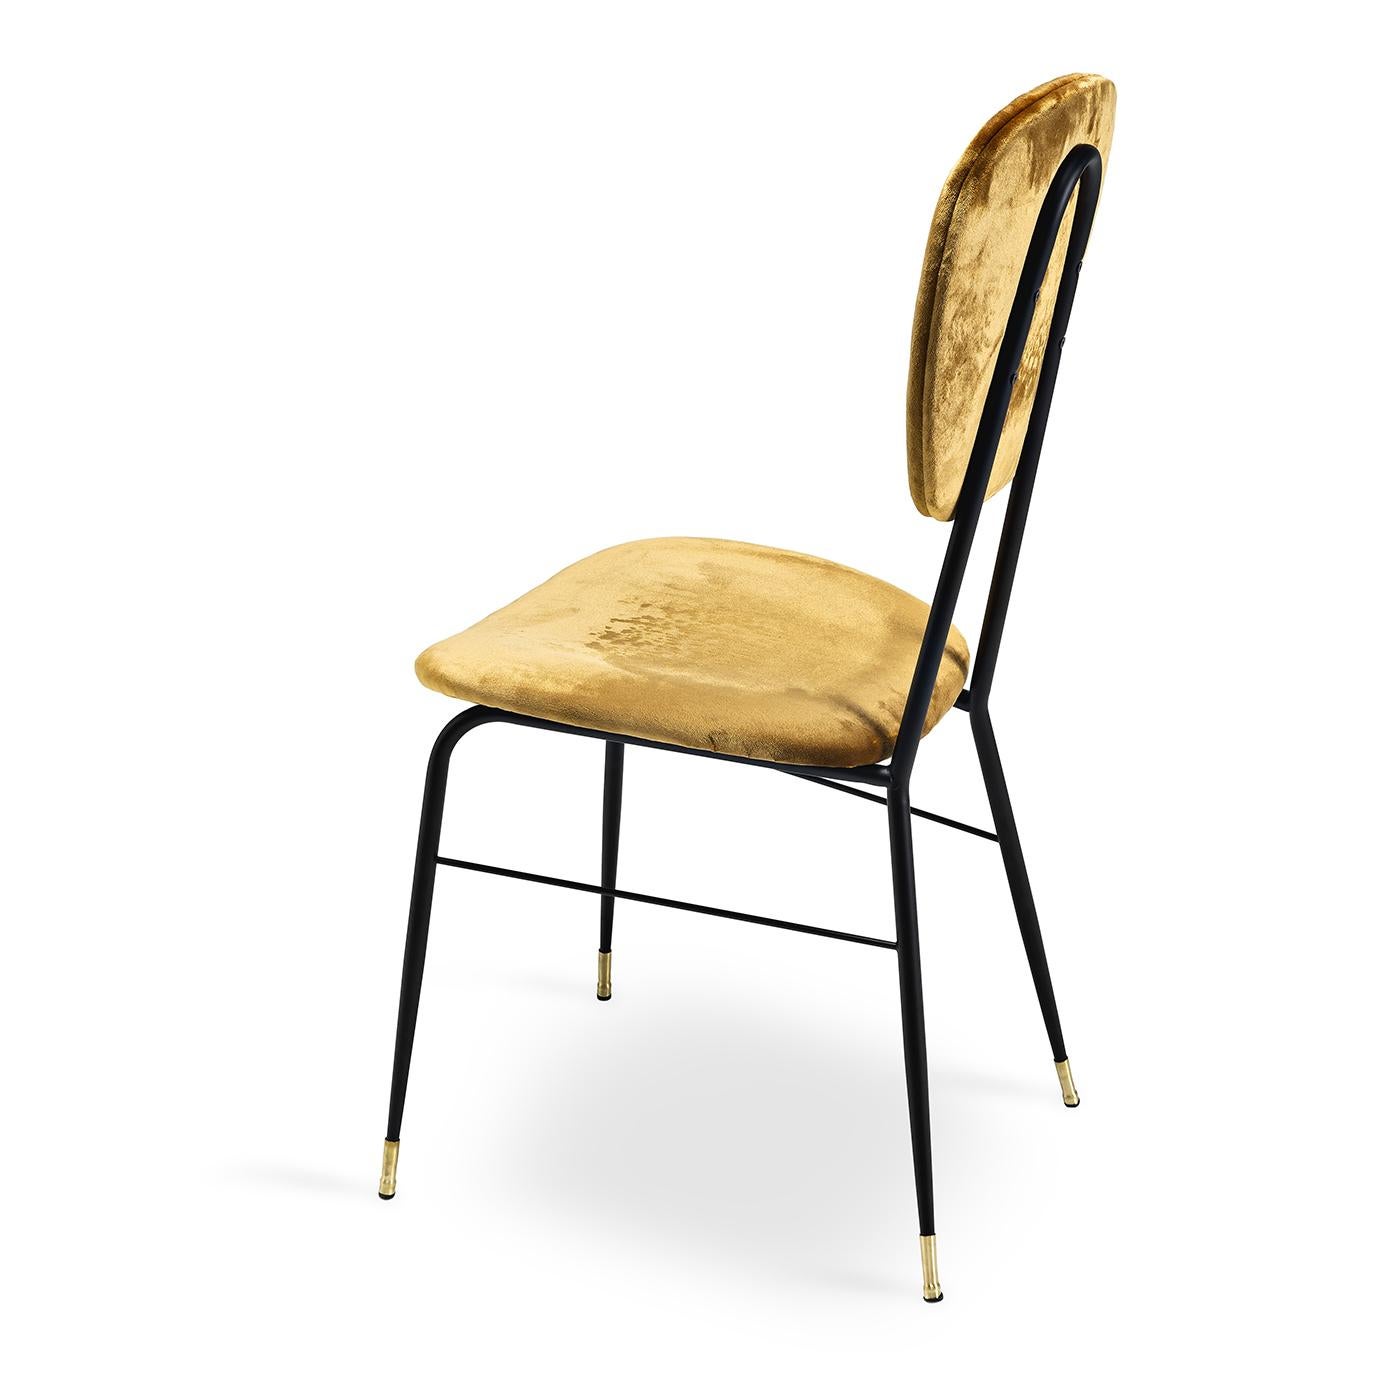 Take a glamorous seat on this vintage-feel dining chair with a high back, and a sleek metal frame painted in a matte black finish. Back and seat are both comfortable and structured thanks to polyurethane and curved wood inserts and are upholstered